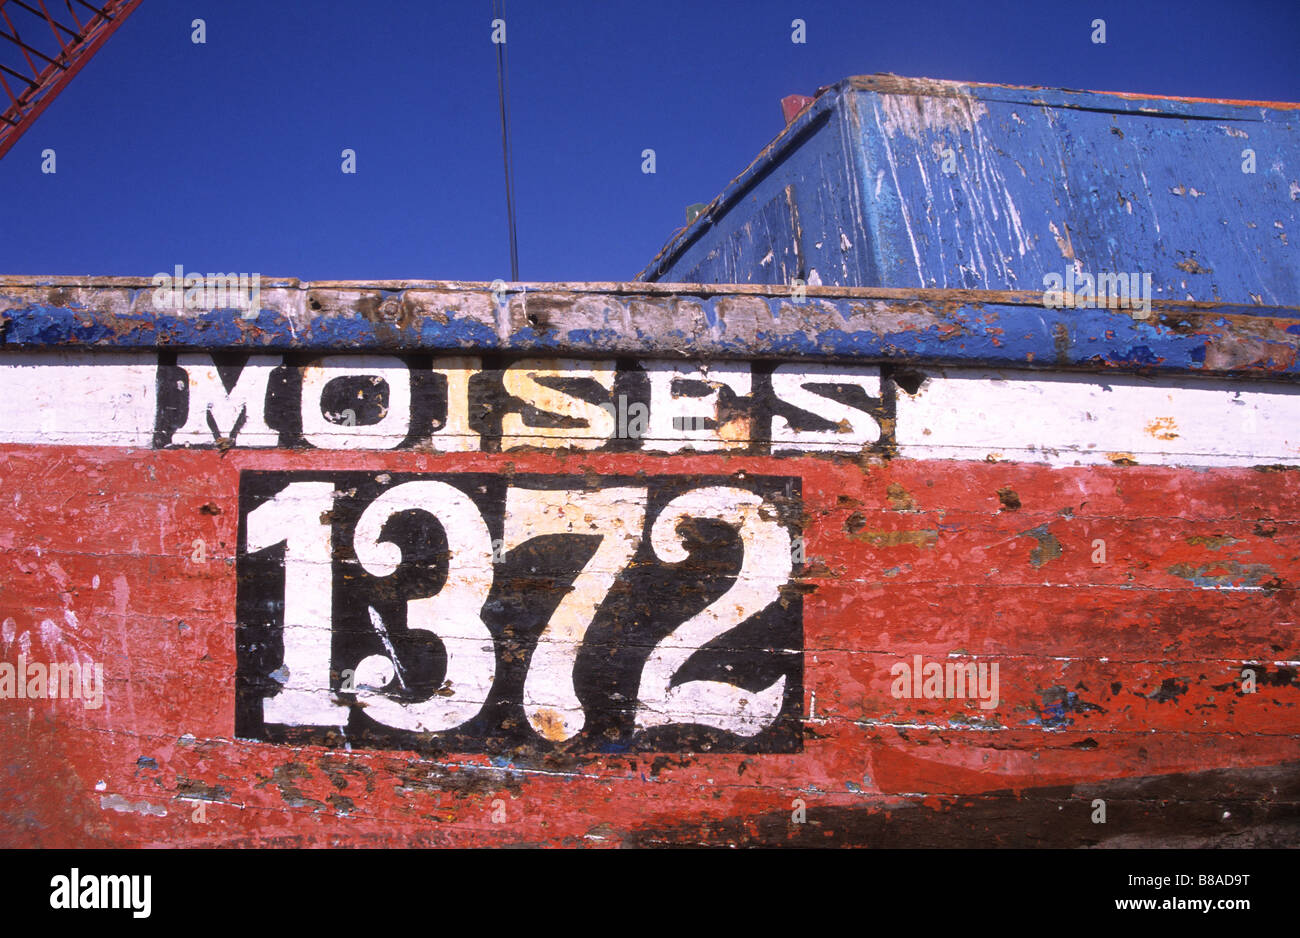 Detail of Moises 1372, a colourful old wooden fishing boat in port, Iquique, Chile Stock Photo